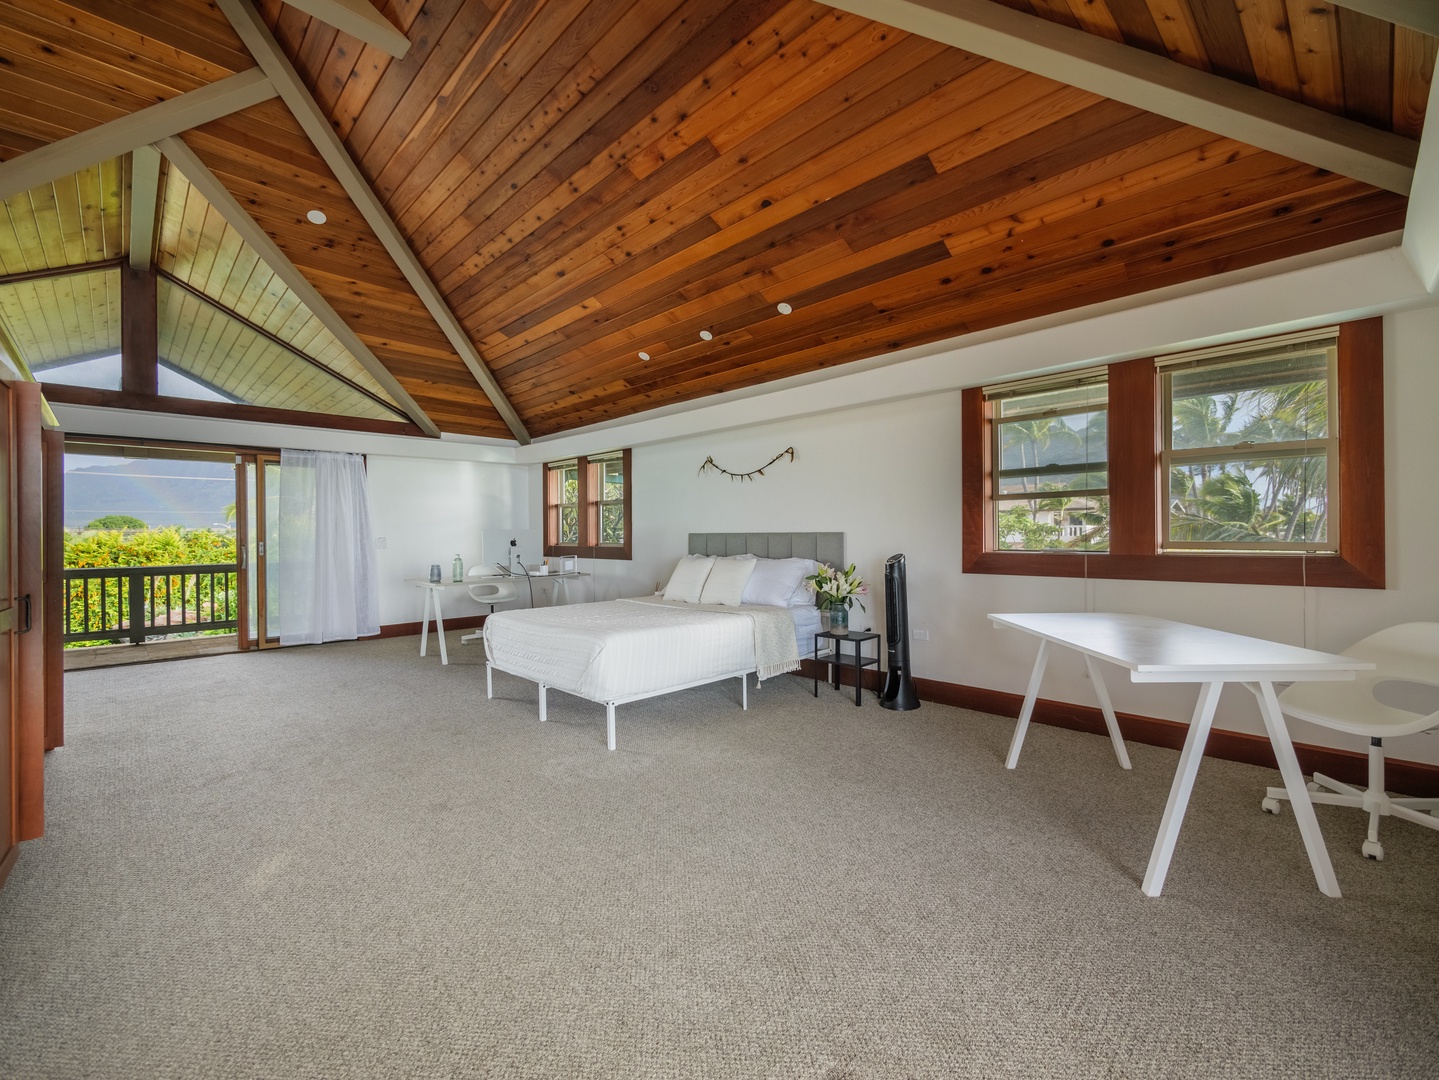 Waianae Vacation Rentals, Konishiki Beachhouse - Primary suite with a dedicated workspace and private deck.